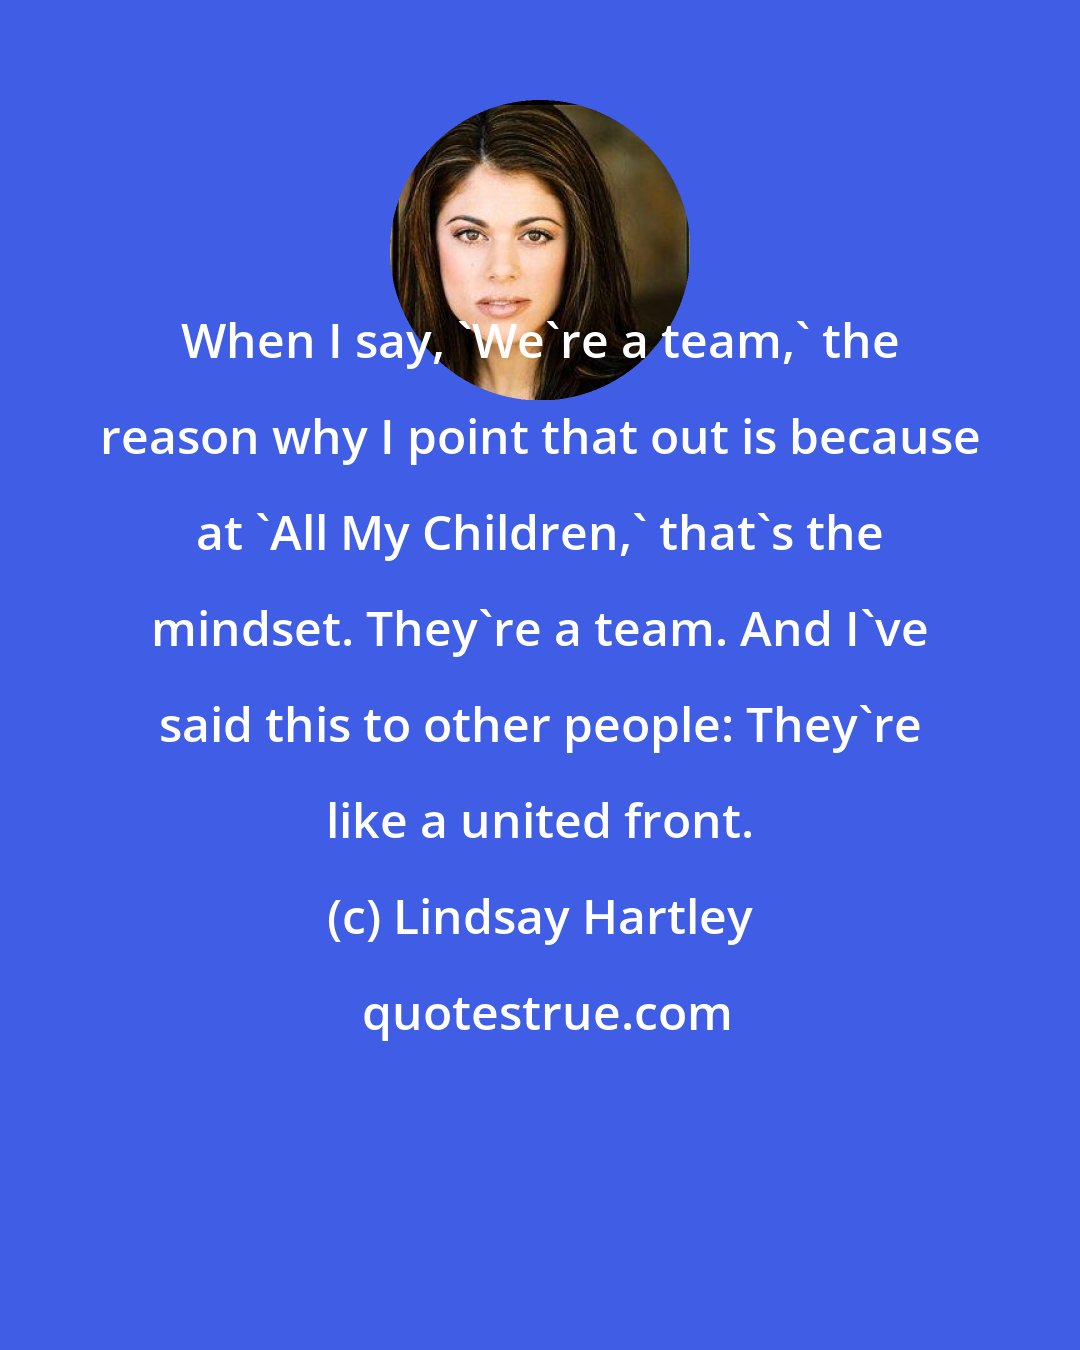 Lindsay Hartley: When I say, 'We're a team,' the reason why I point that out is because at 'All My Children,' that's the mindset. They're a team. And I've said this to other people: They're like a united front.